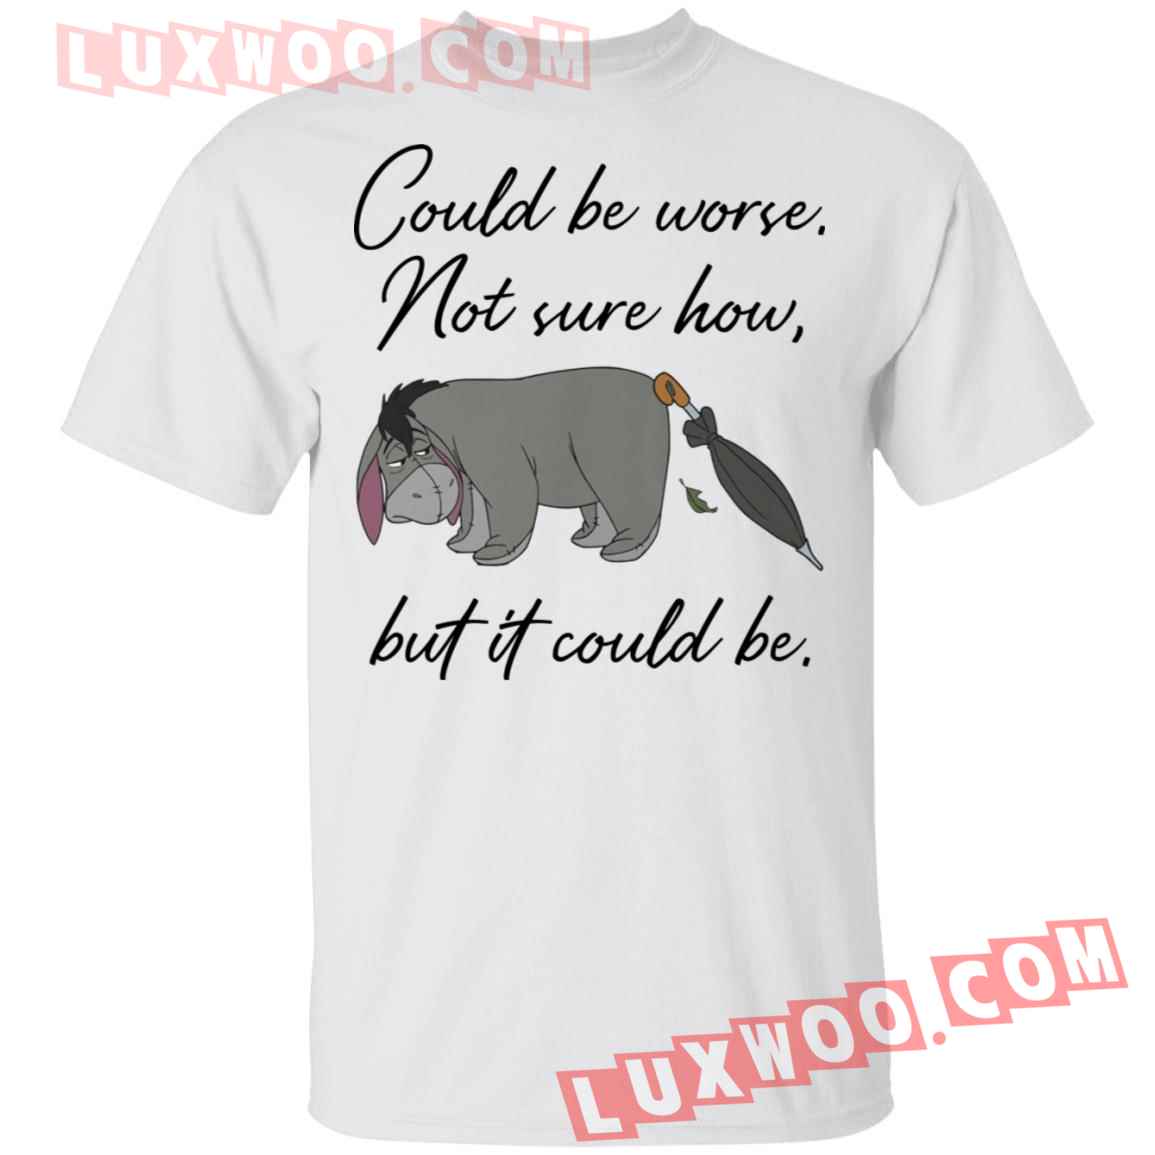 Eeyore Could Be Worse Not Sure How But It Could Be Shirt